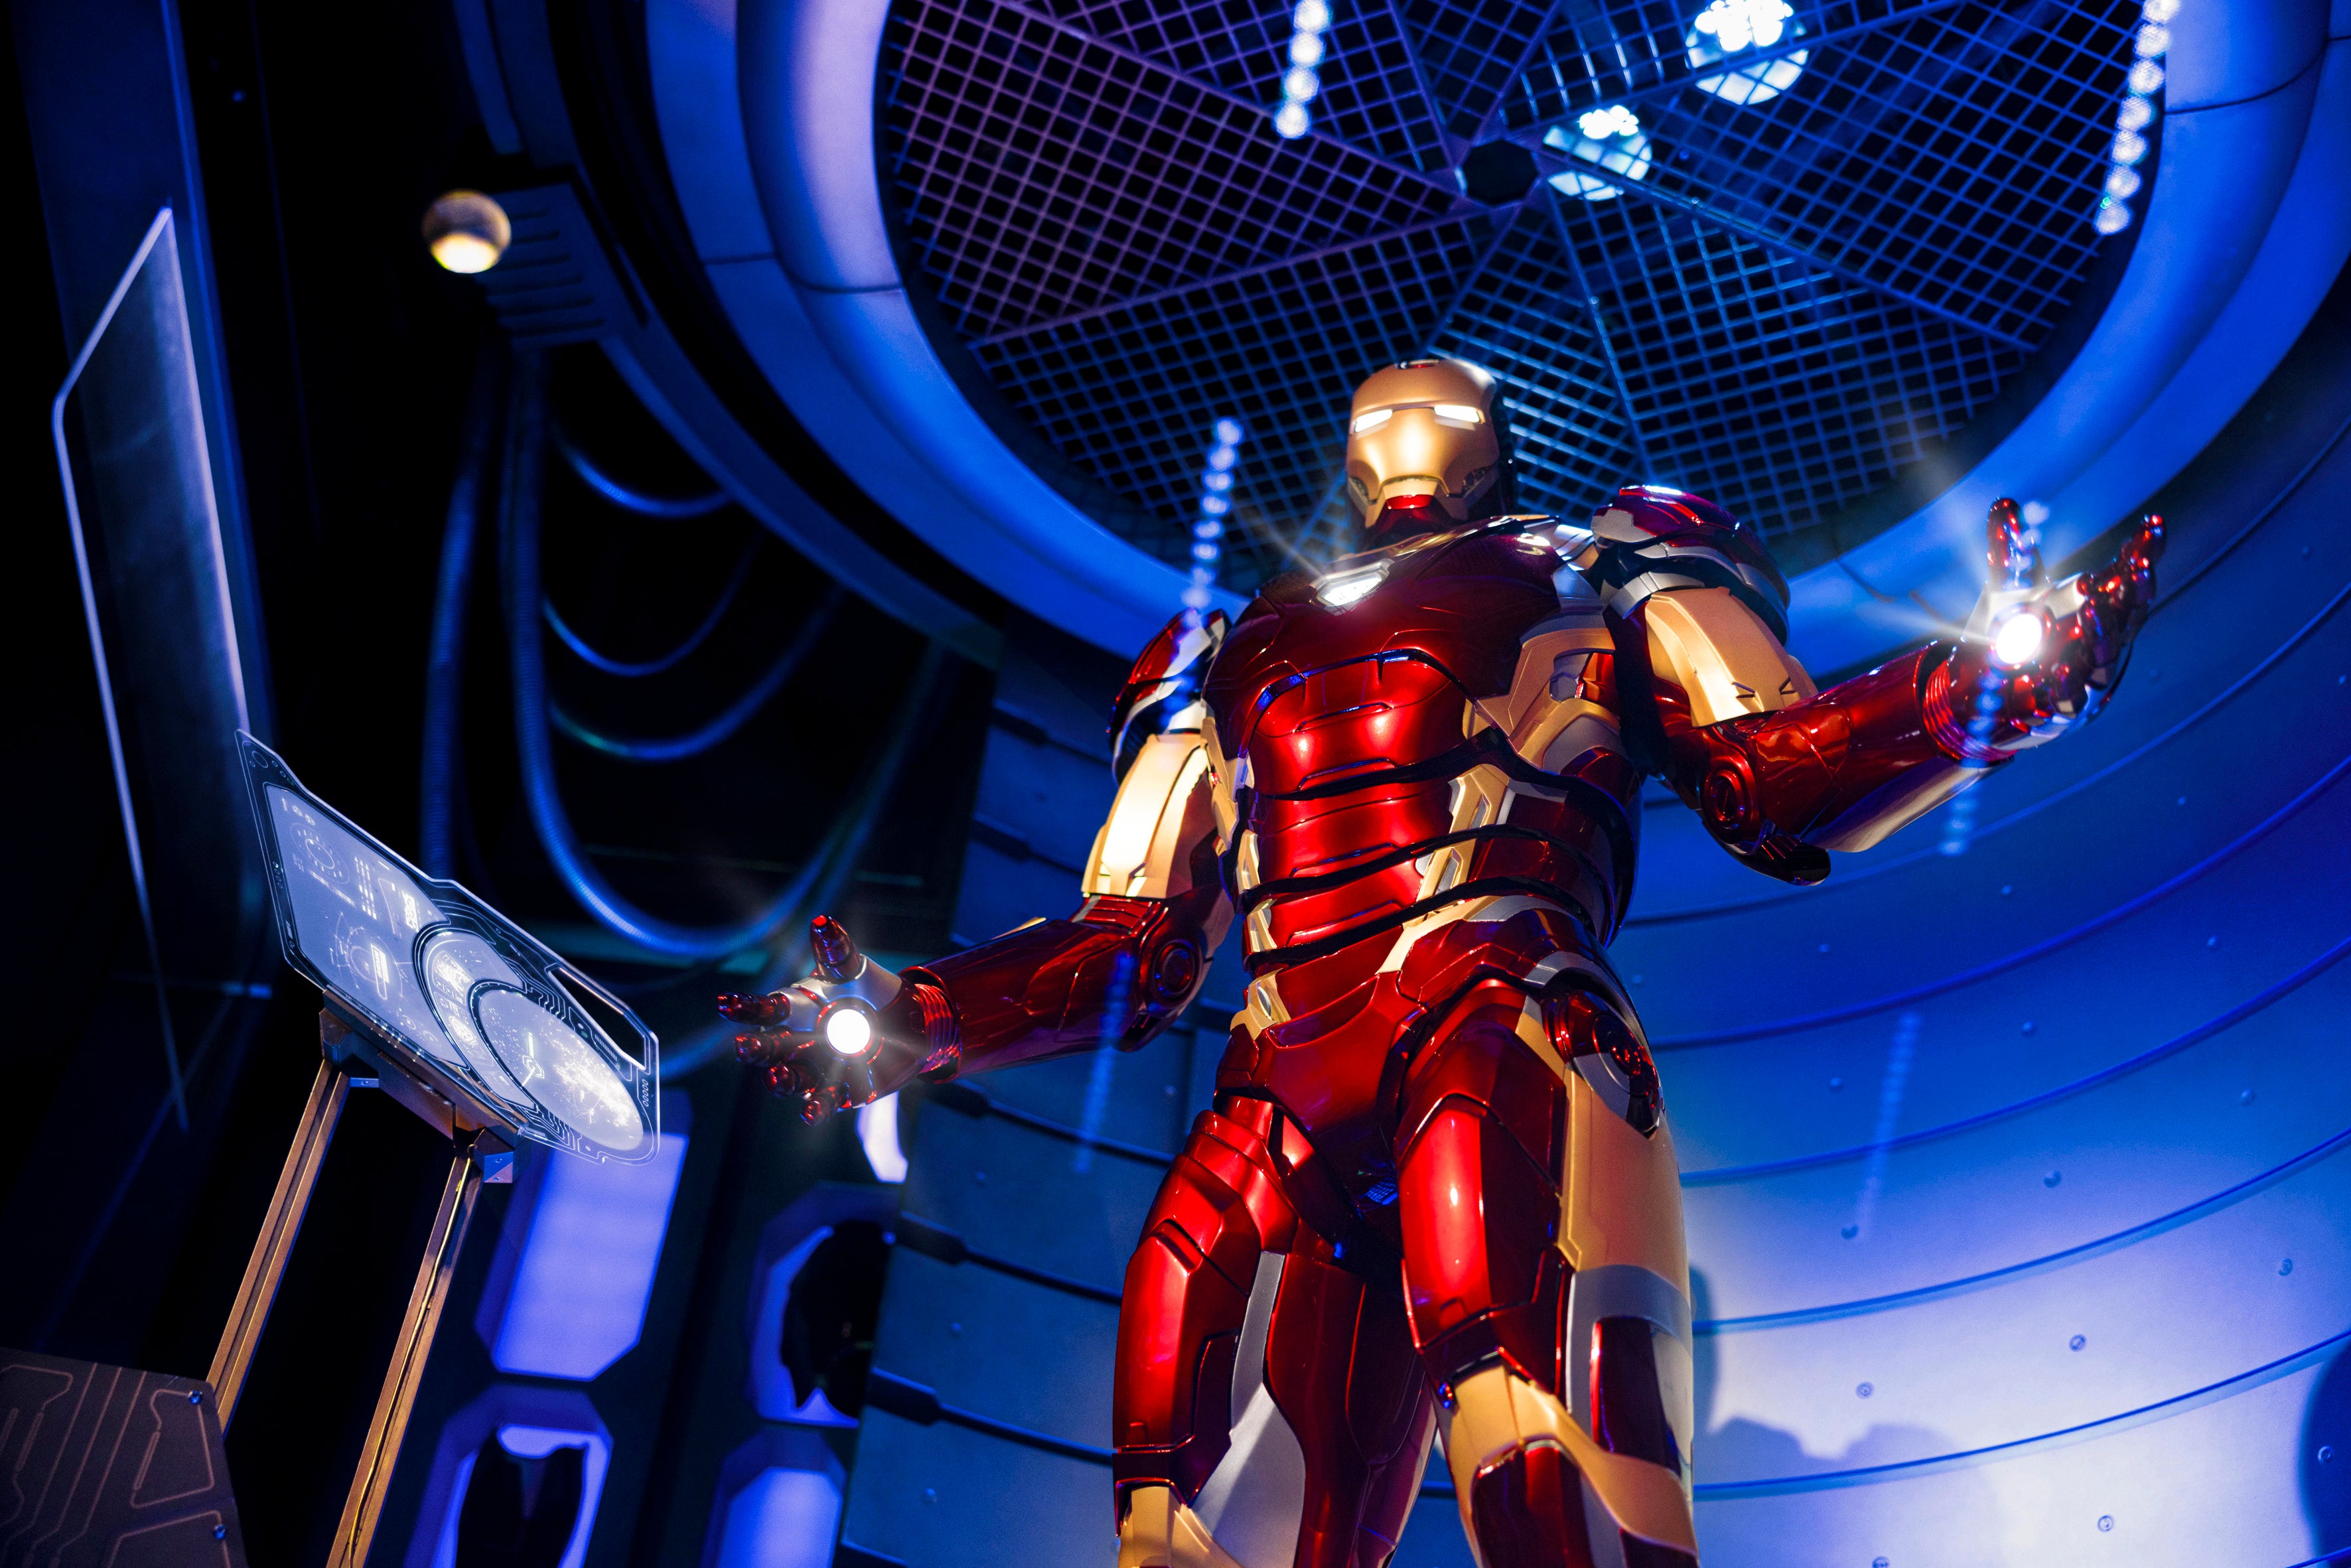 The Iron Man audio-animatronic in the Avengers Assemble: Flight Force rollercoaster in Avengers Campus at Disneyland Paris (Disney/PA)